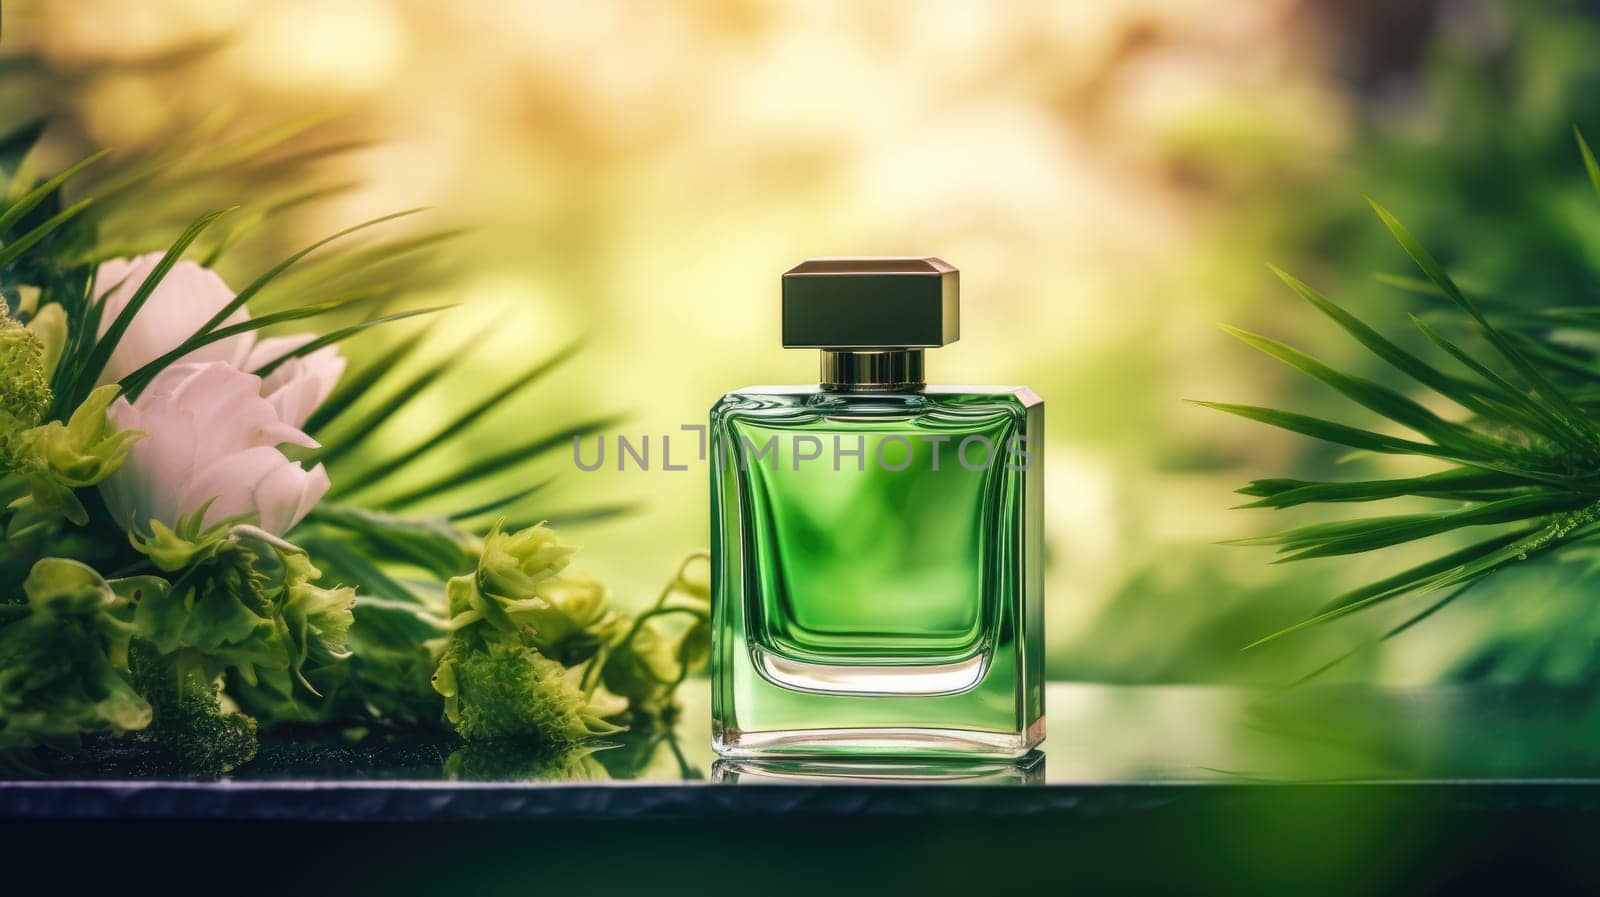 Transparent green glass perfume bottle mockup with plants on background. Eau de toilette. Mockup, spring flat lay. by JuliaDorian